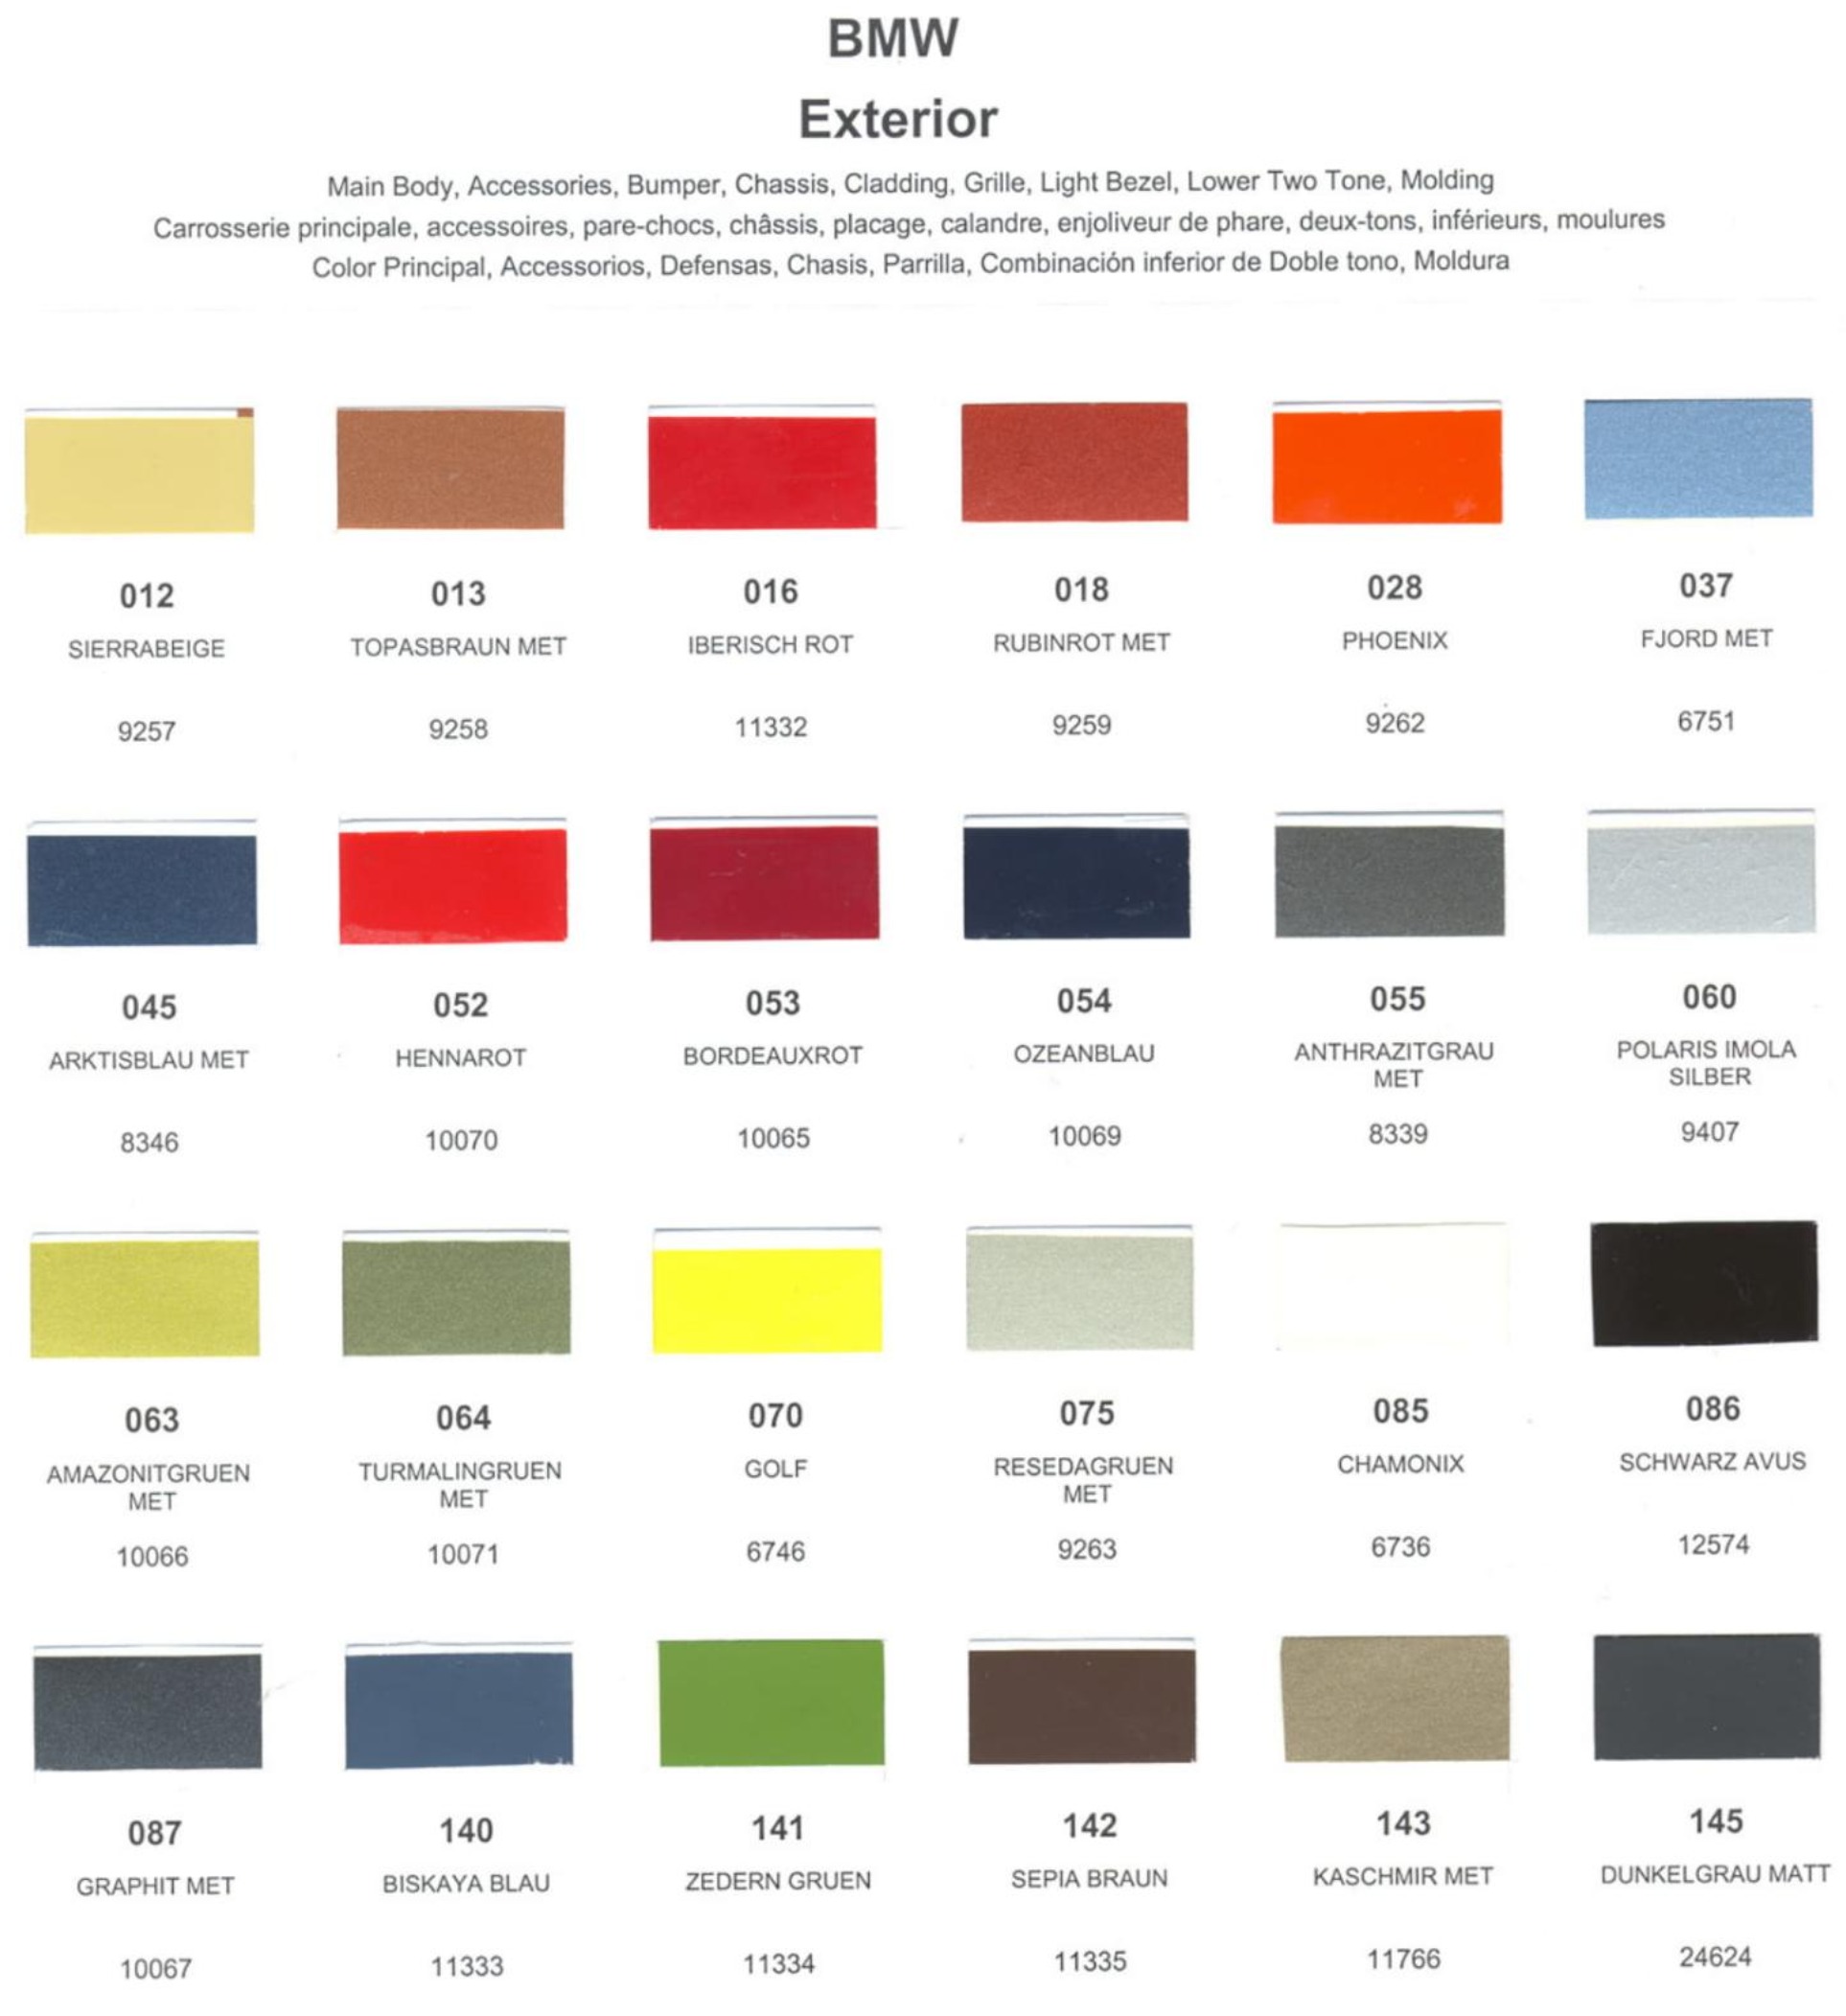 Paint Chips for Exterior, Interior, and Wheel Colors For BMW Colors 